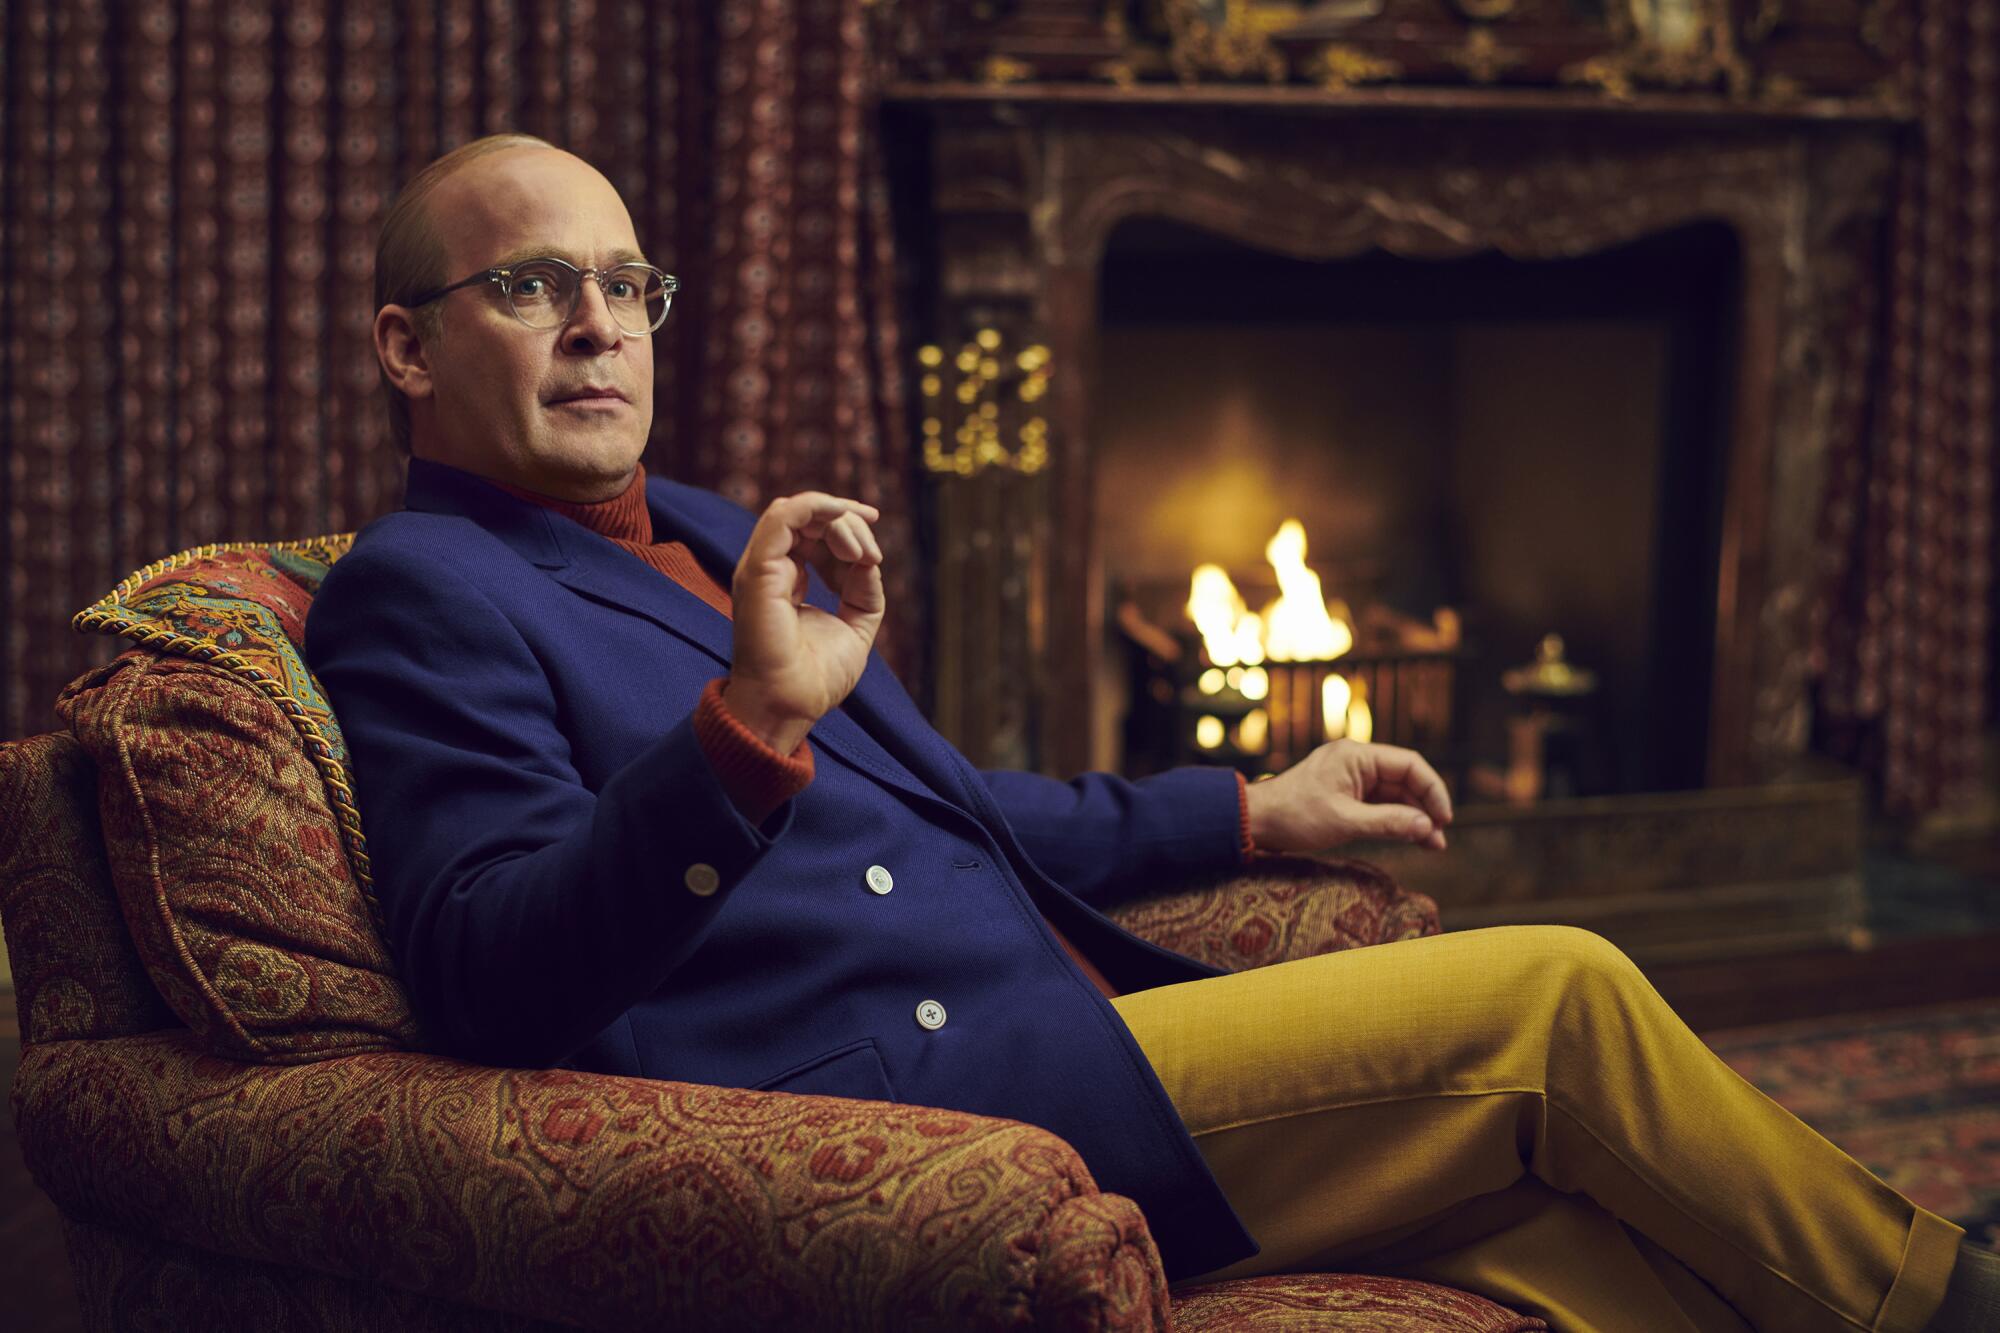 Tom Hollander as Truman Capote, sitting in an armchair by a fireplace, in "Feud: Capote vs. the Swans."